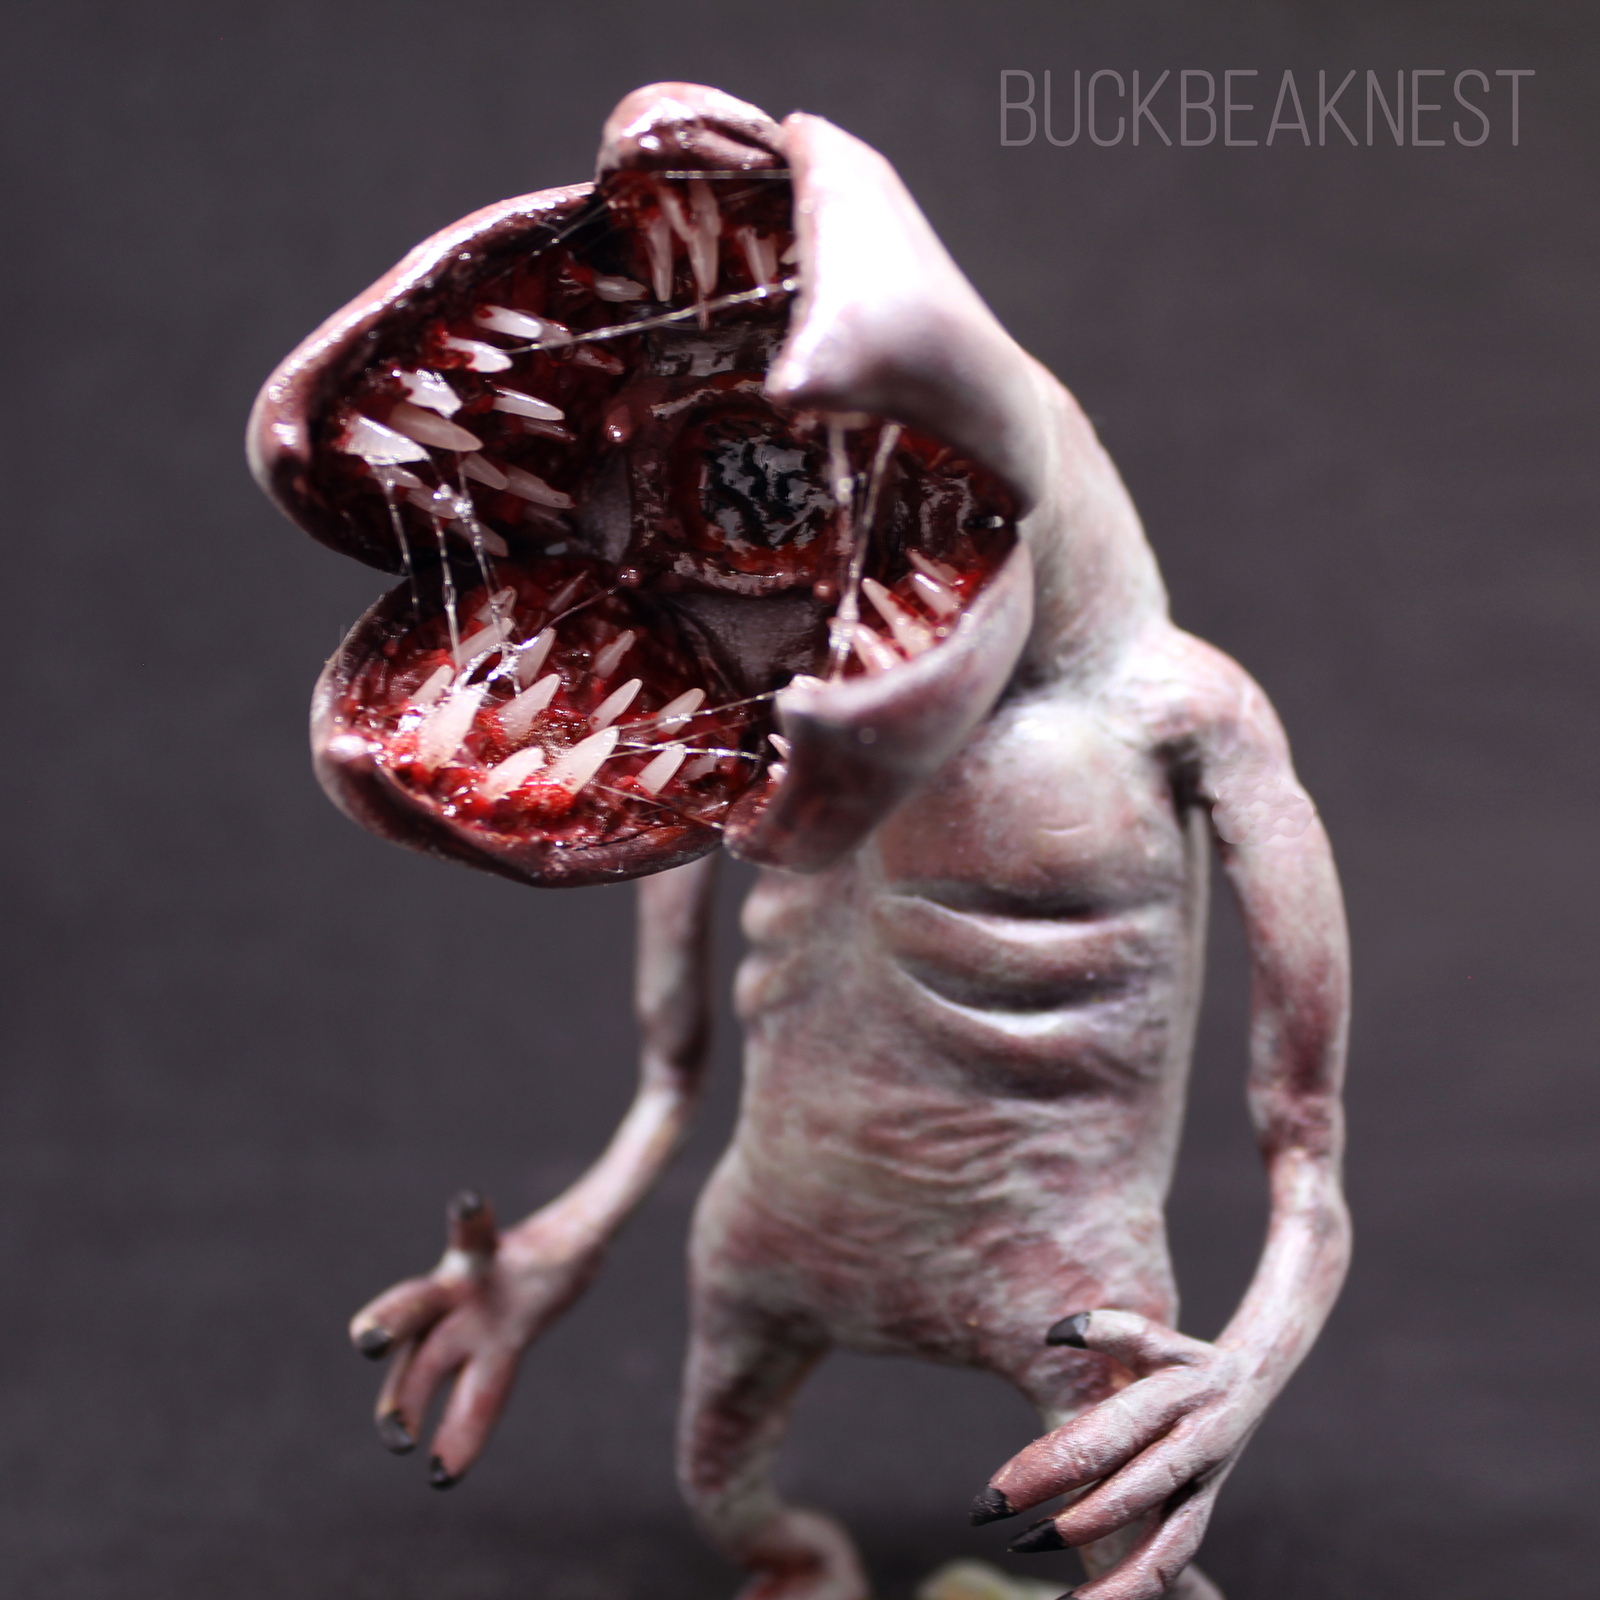 Demogorgon from Stranger Things - TV series Stranger Things, Demogorgon, Longpost, Needlework without process, Polymer clay, Figurines, Serials, Very strange things, My